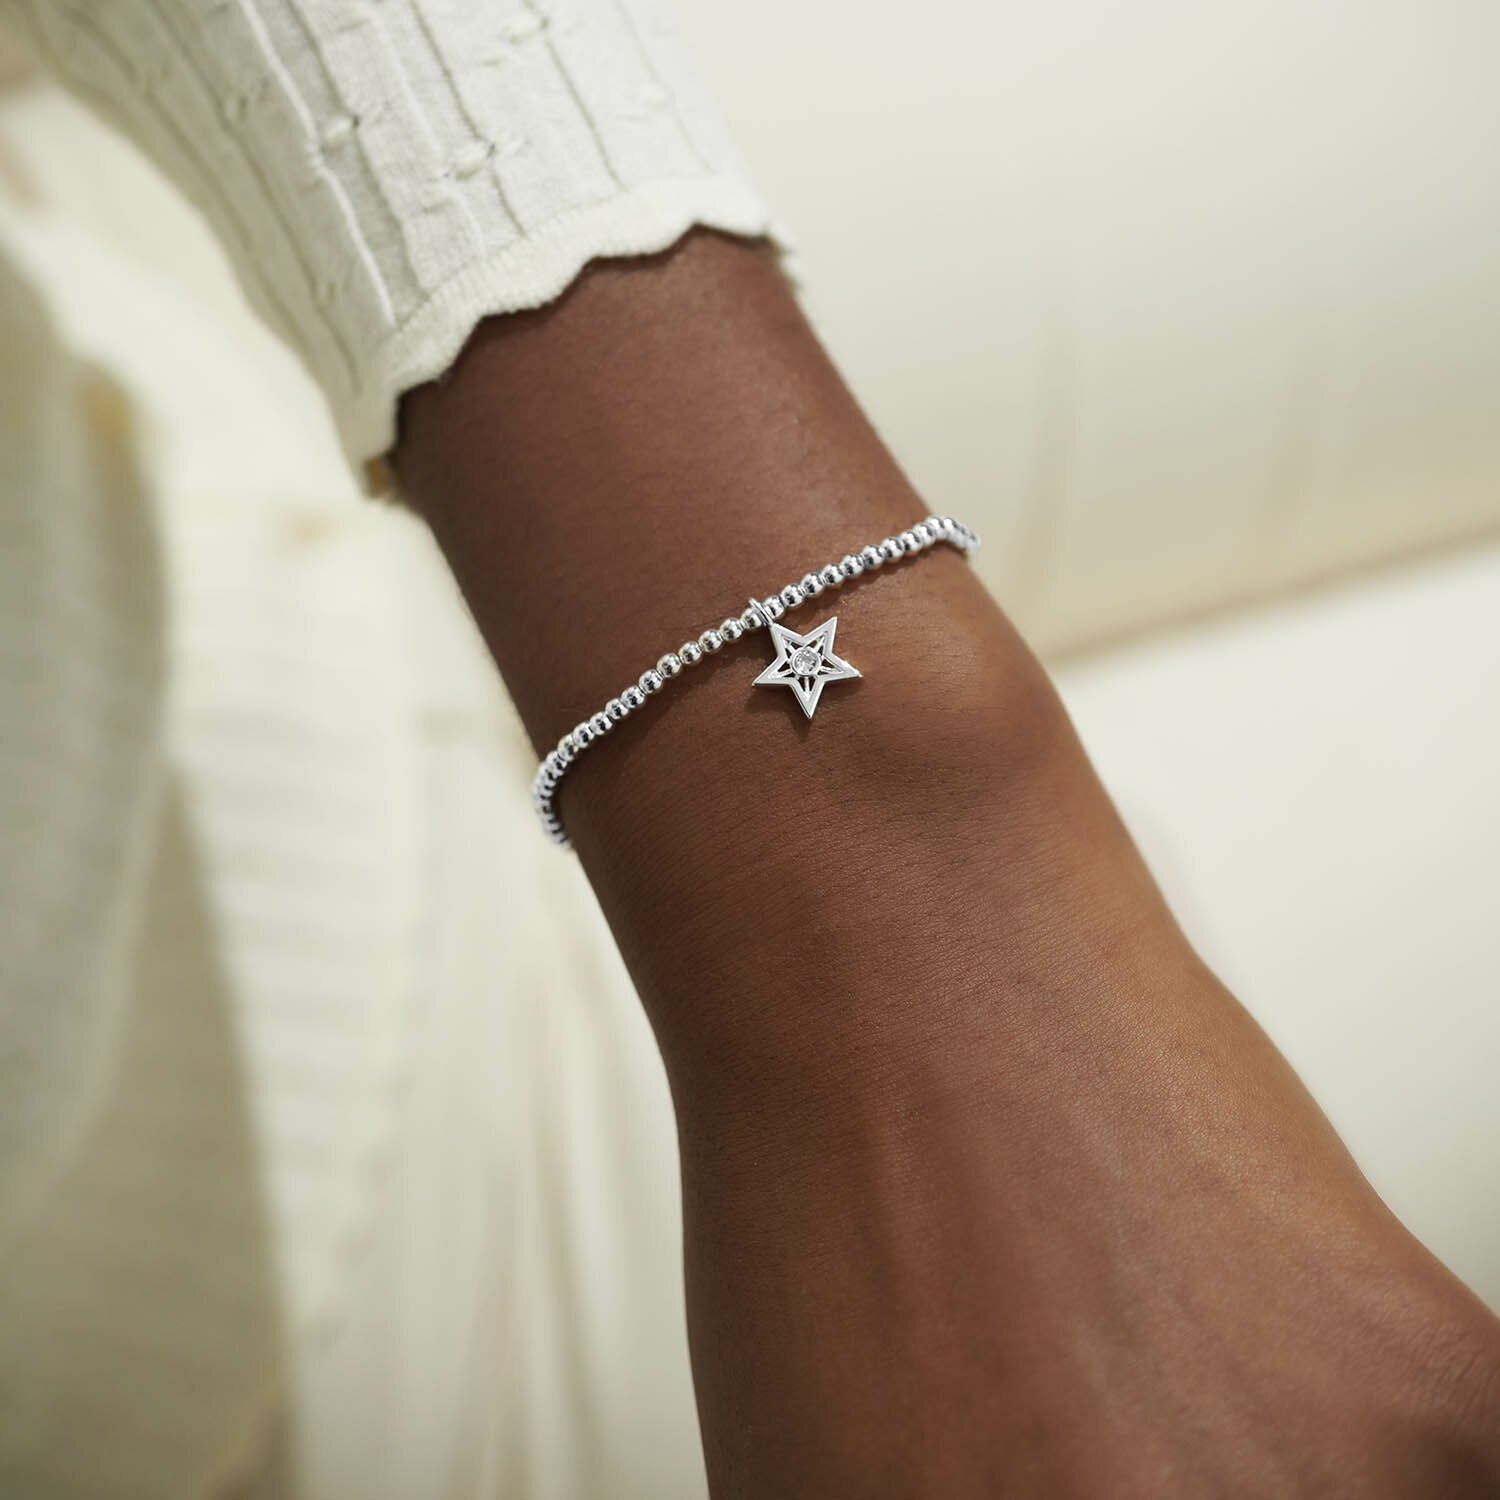 Joma Jewellery A Little 'The Best Is Yet To Come' Bracelet